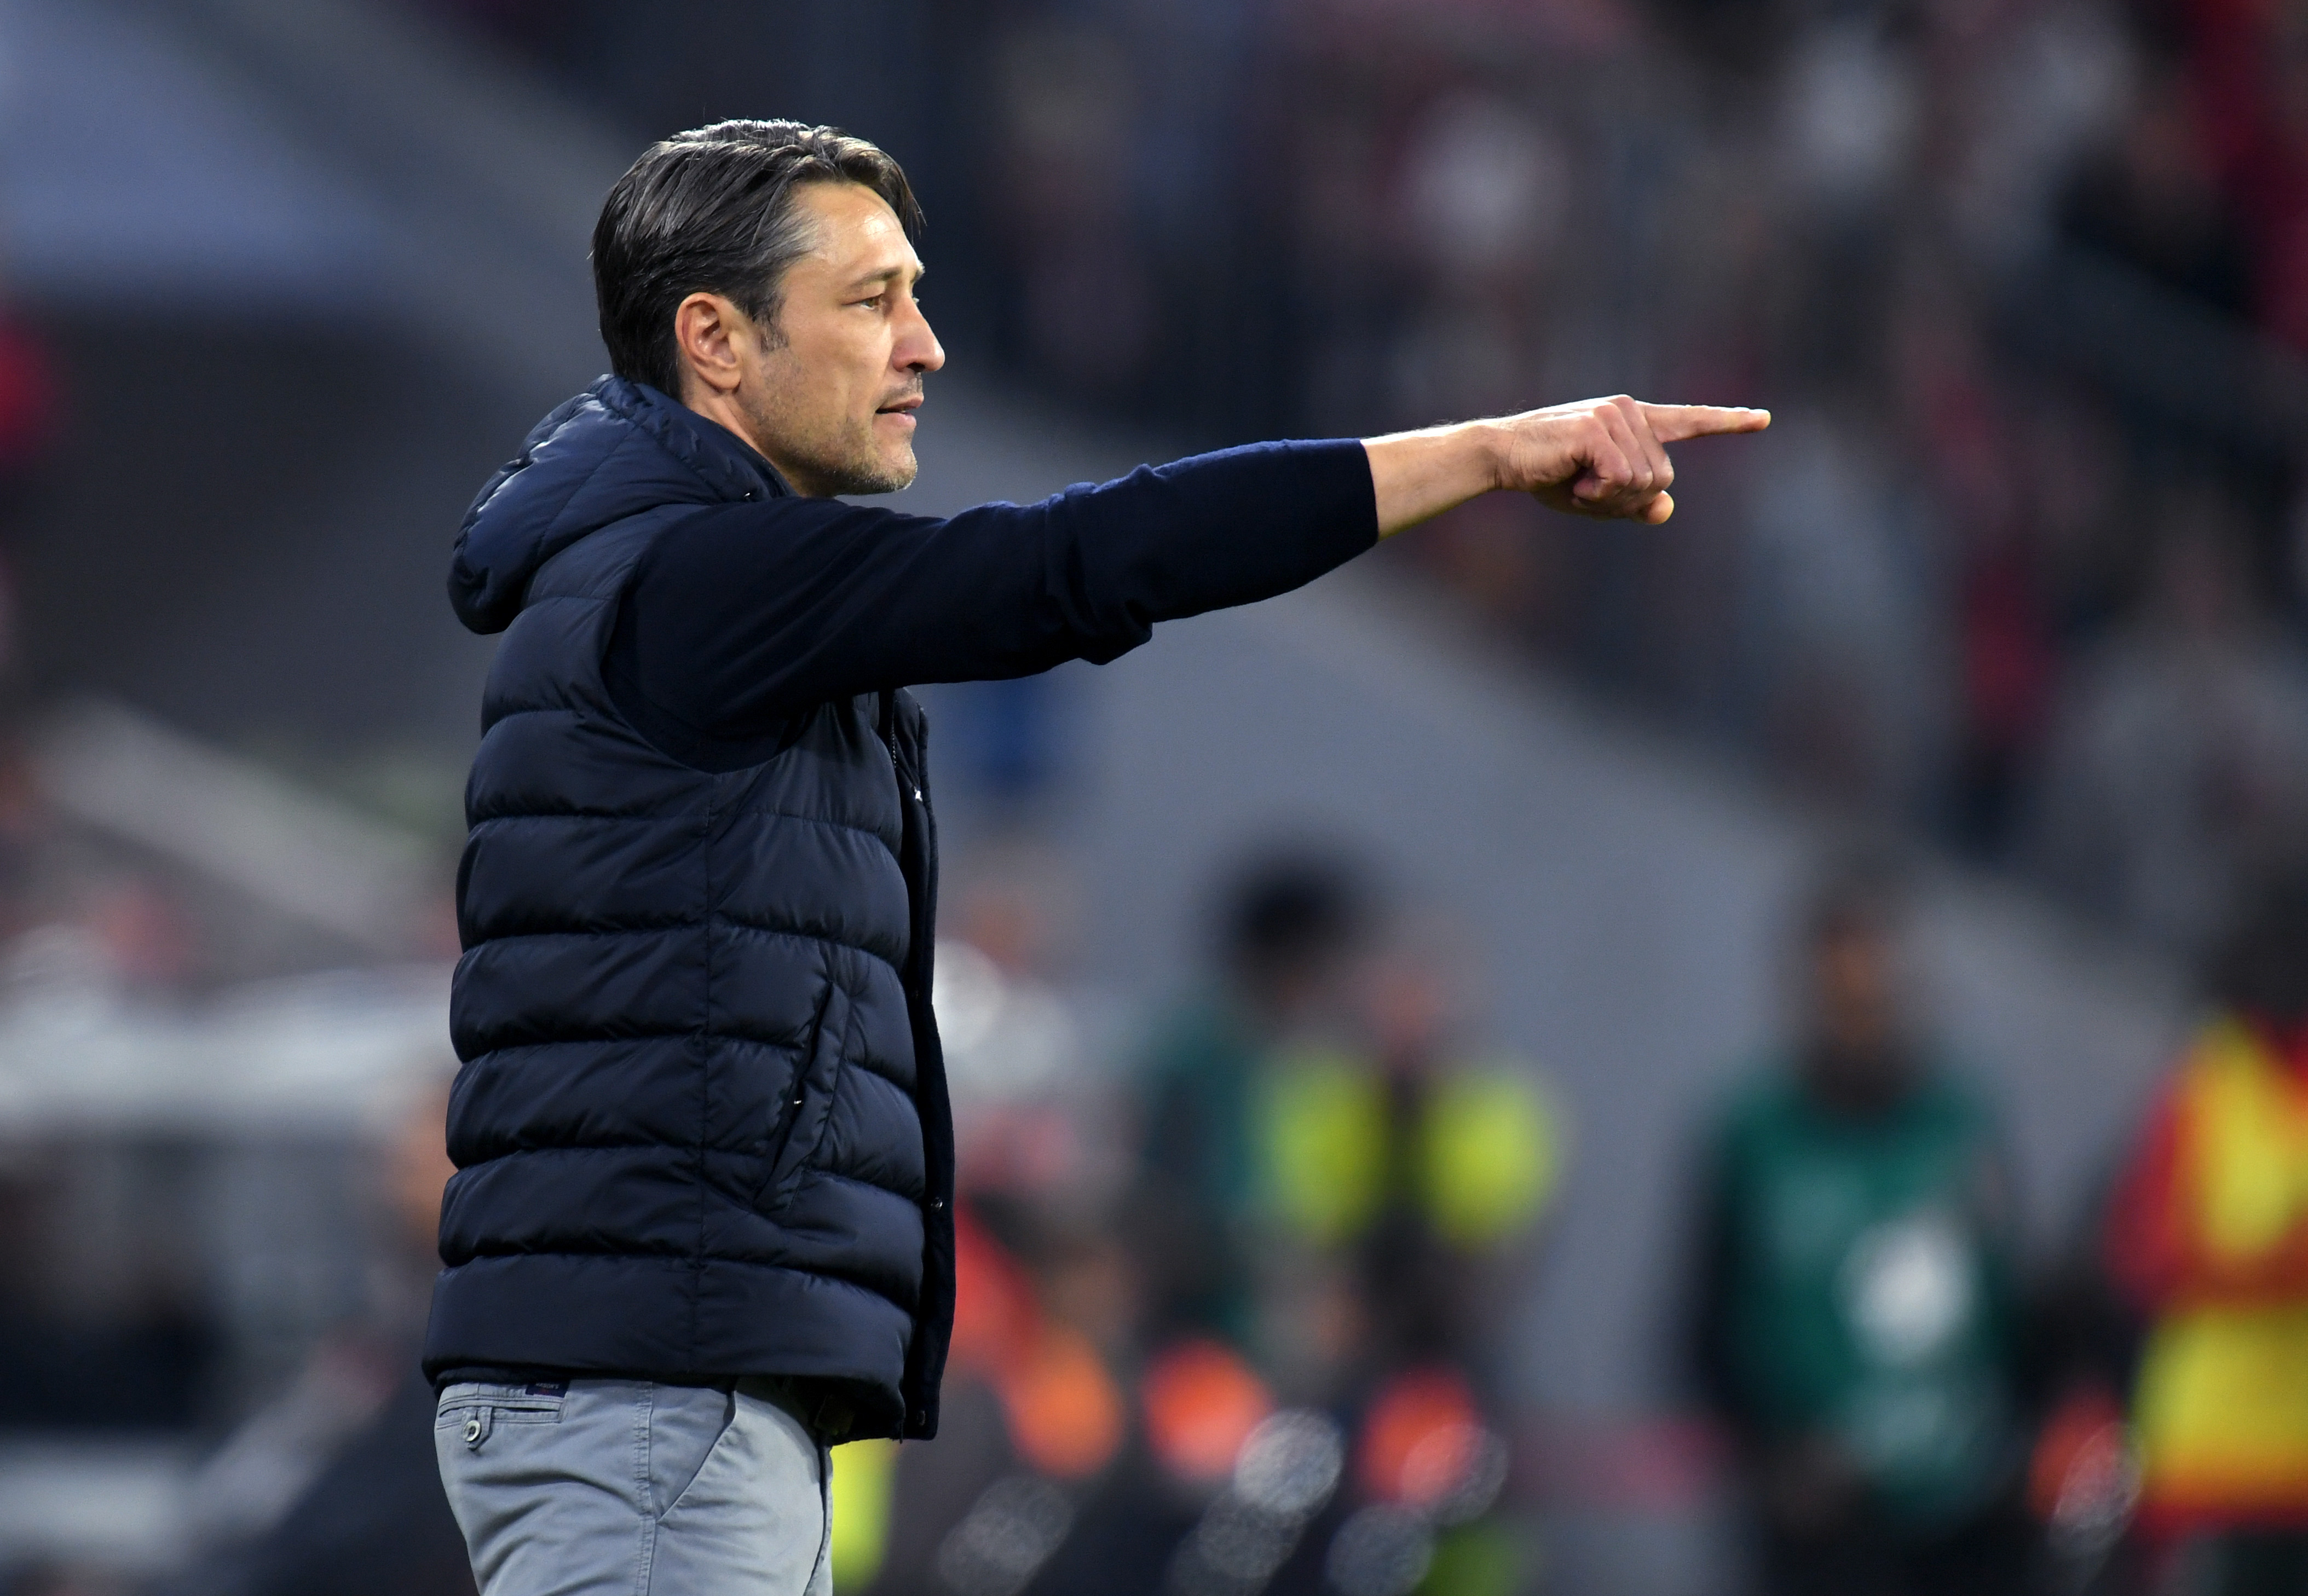 Bayern Munich's Croatian headcoach Niko Kovac gestures during the German first division Bundesliga football match FC Bayern Munich vs Borussia Moenchengladbach in Munich, southern Germany, on October 6, 2018. (Photo by Christof STACHE / AFP) / RESTRICTIONS: DFL REGULATIONS PROHIBIT ANY USE OF PHOTOGRAPHS AS IMAGE SEQUENCES AND/OR QUASI-VIDEO        (Photo credit should read CHRISTOF STACHE/AFP/Getty Images)